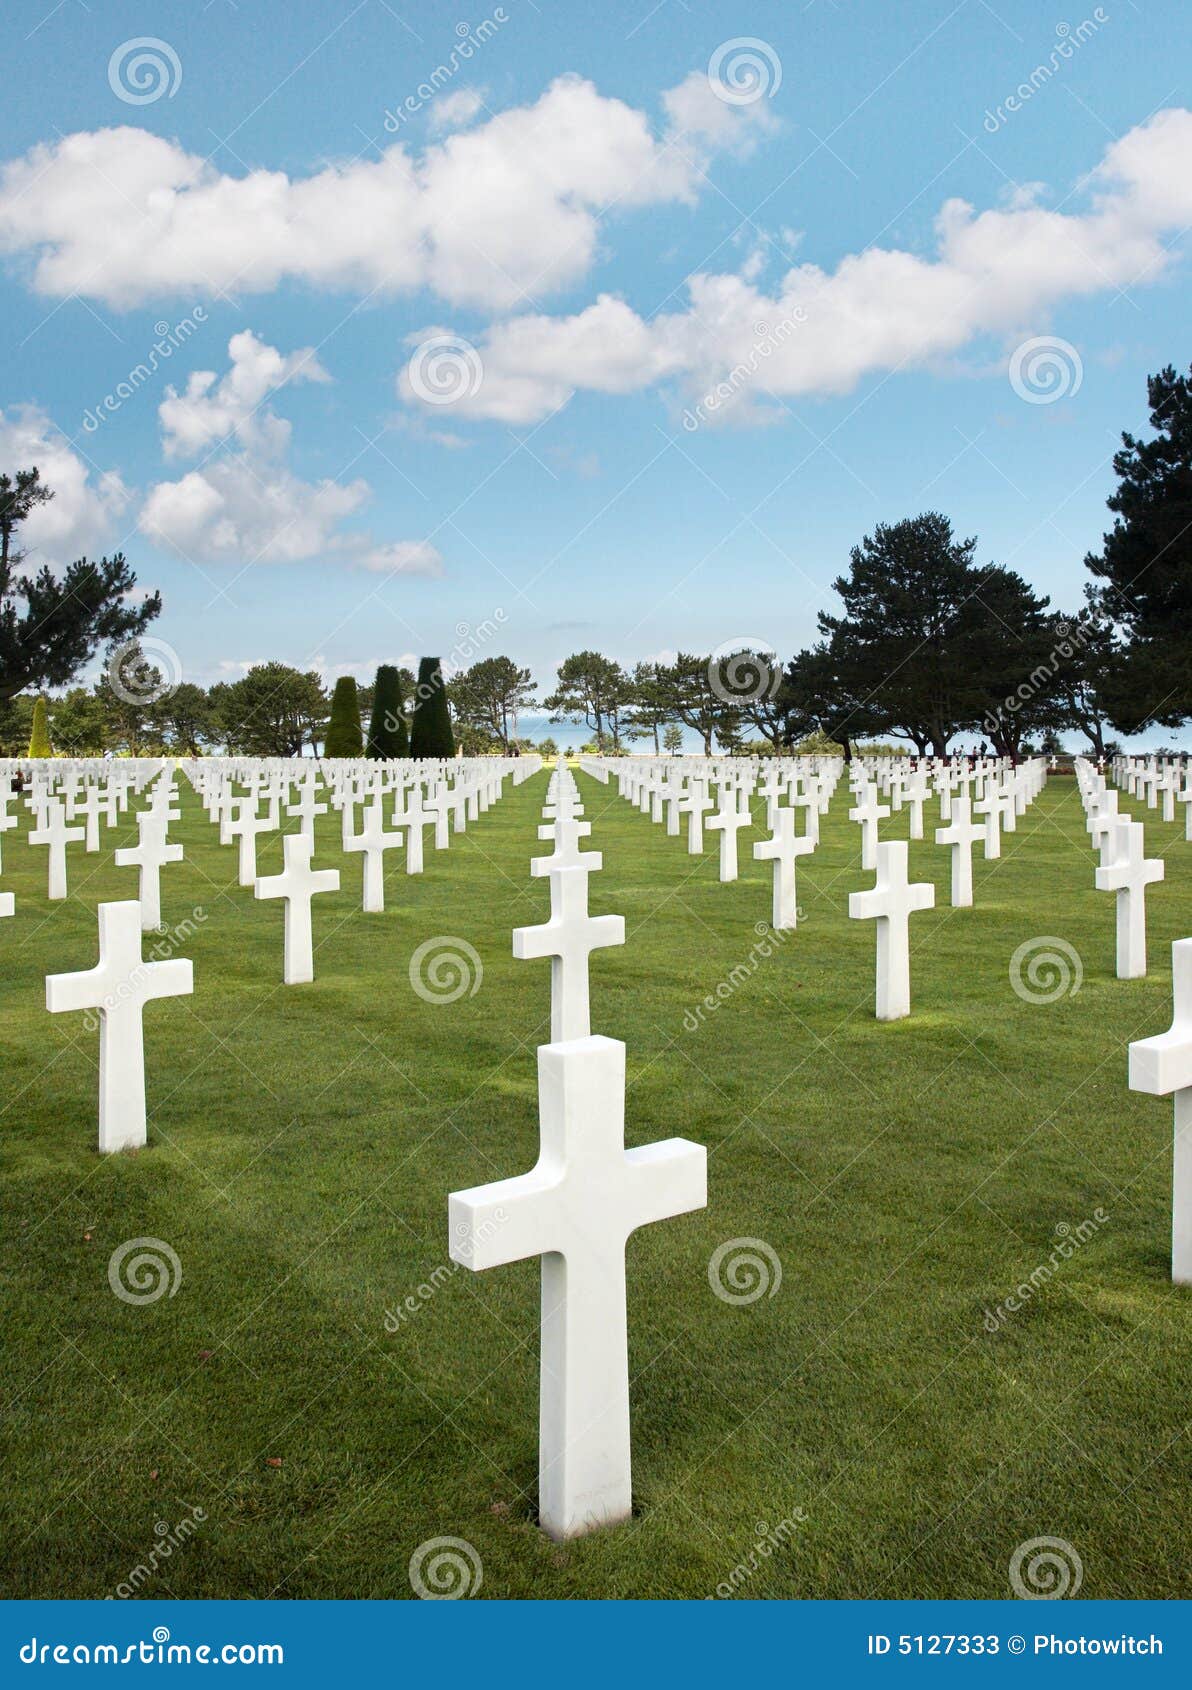 rows of graves